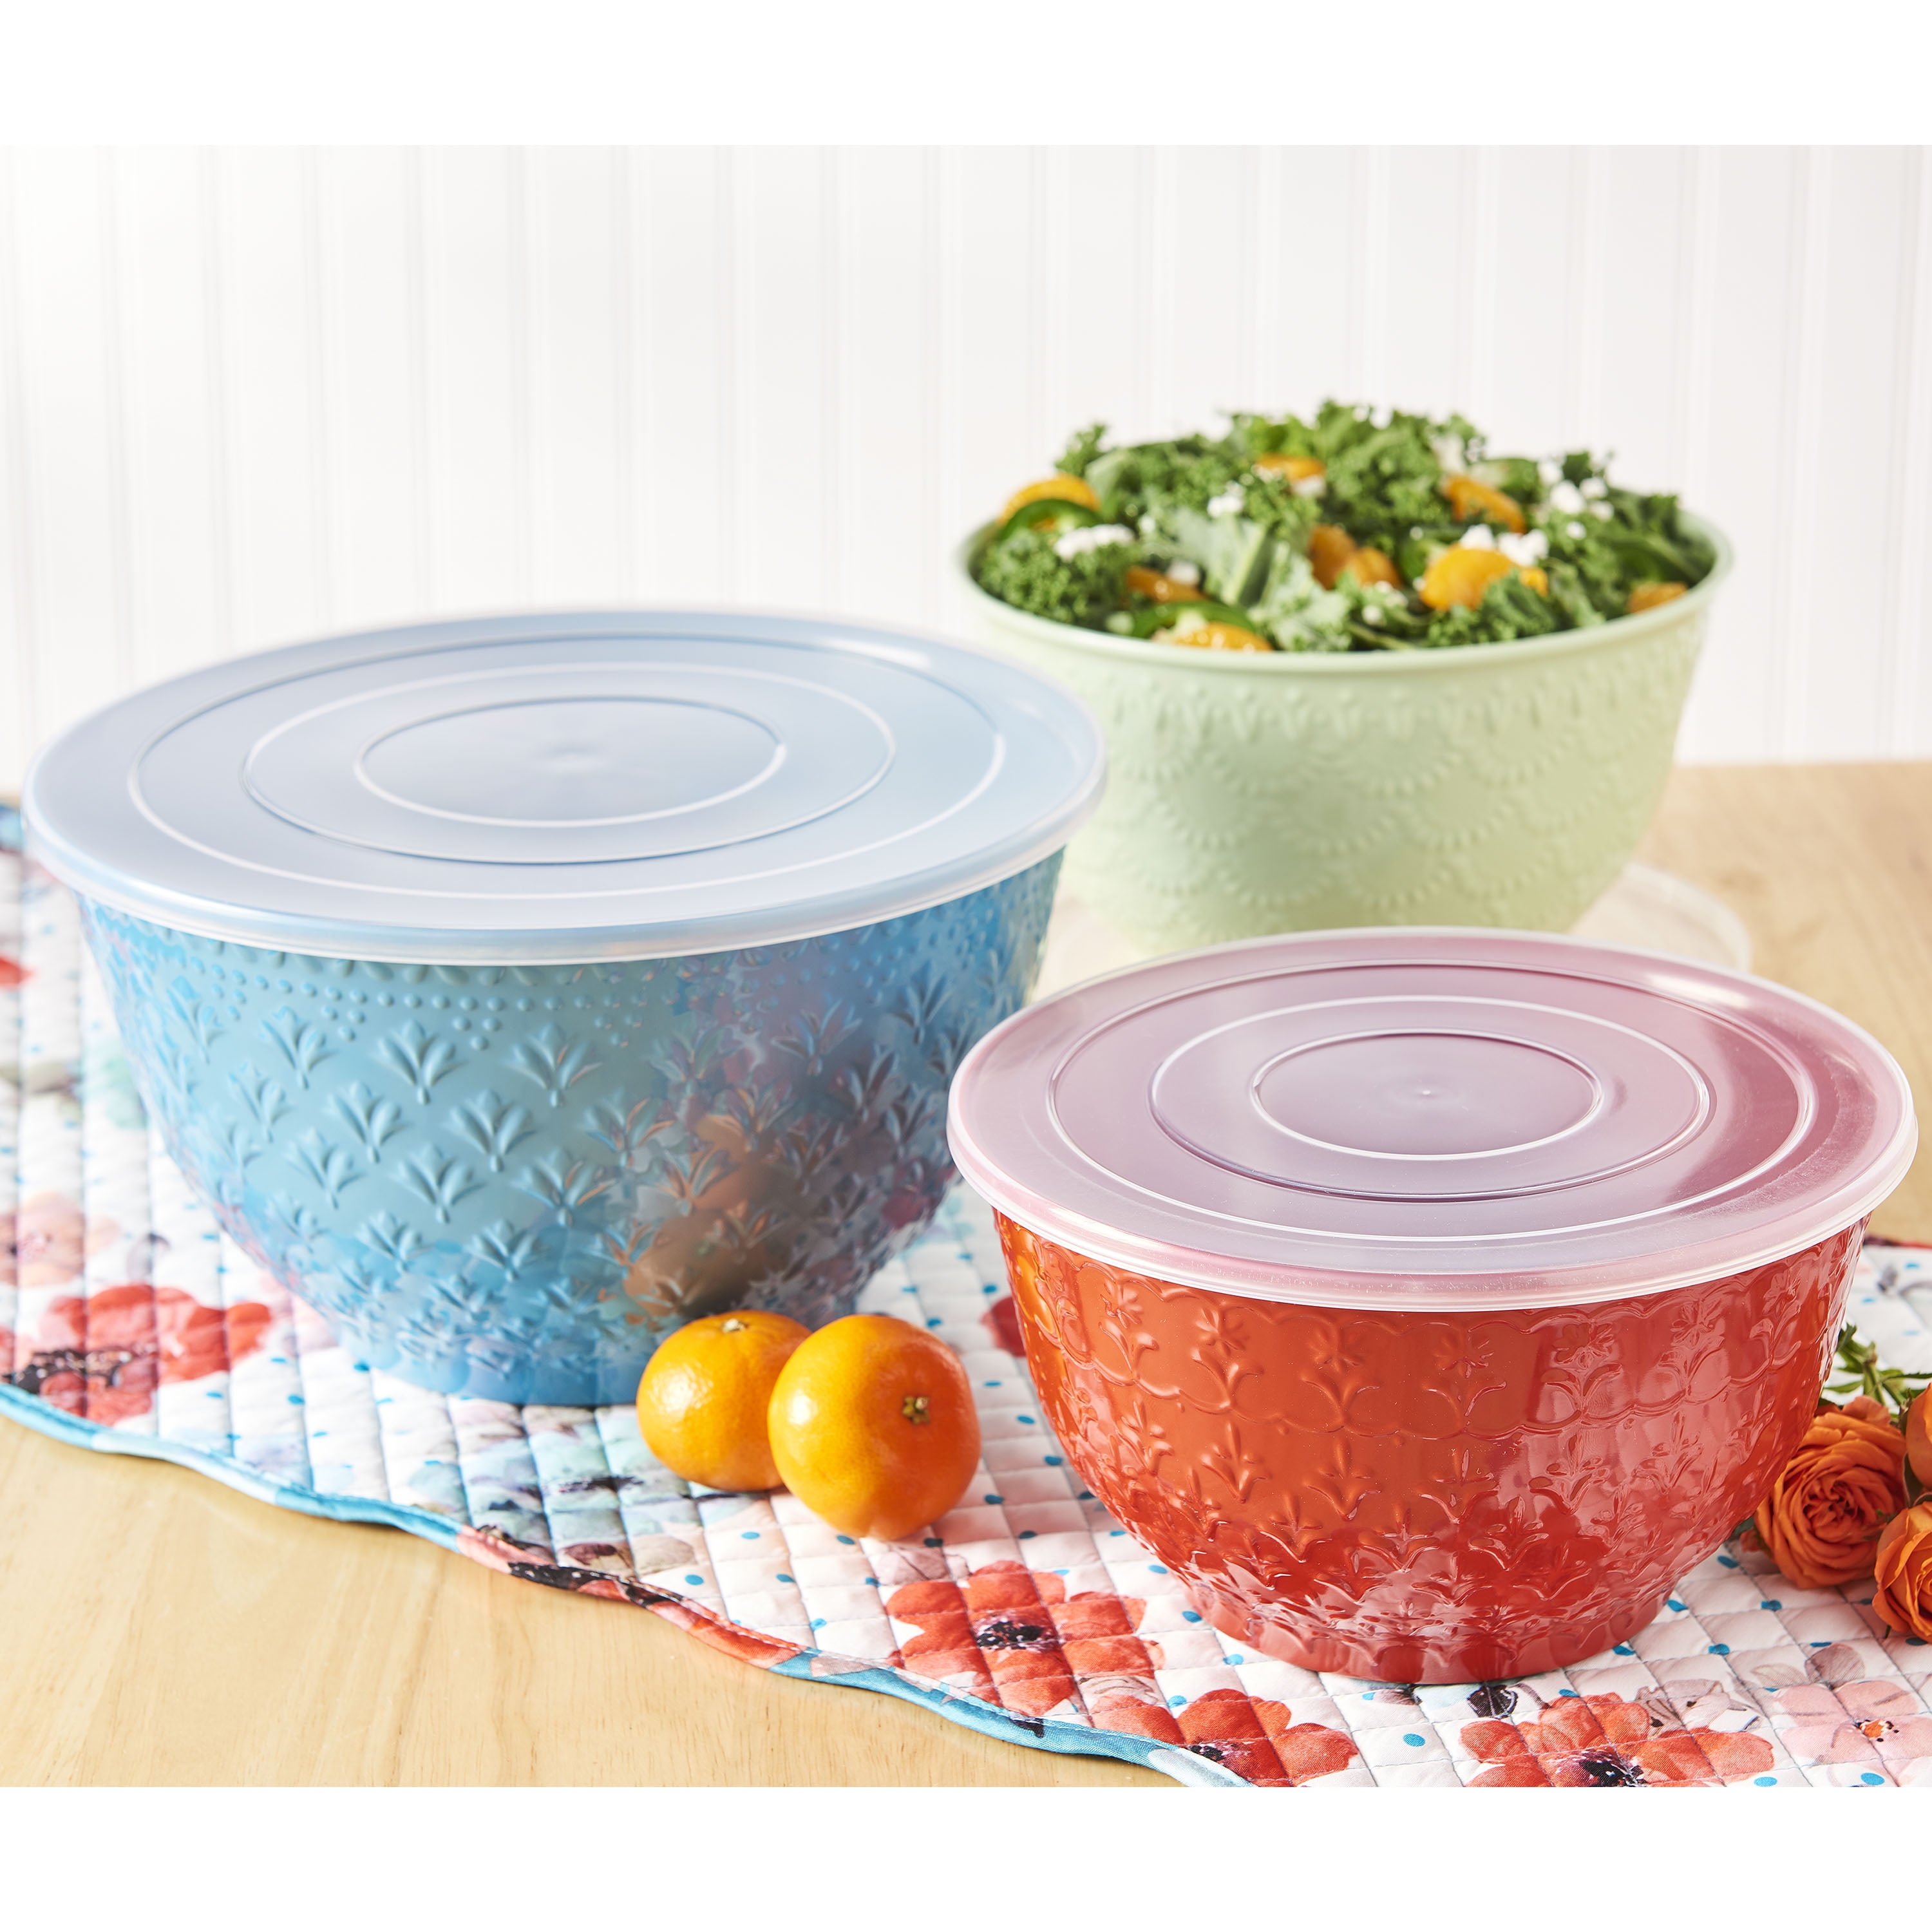 The Pioneer Woman the pioneer woman melamine mixing bowls with lids (set of  3 bowls with 3 lids) (alex marie)